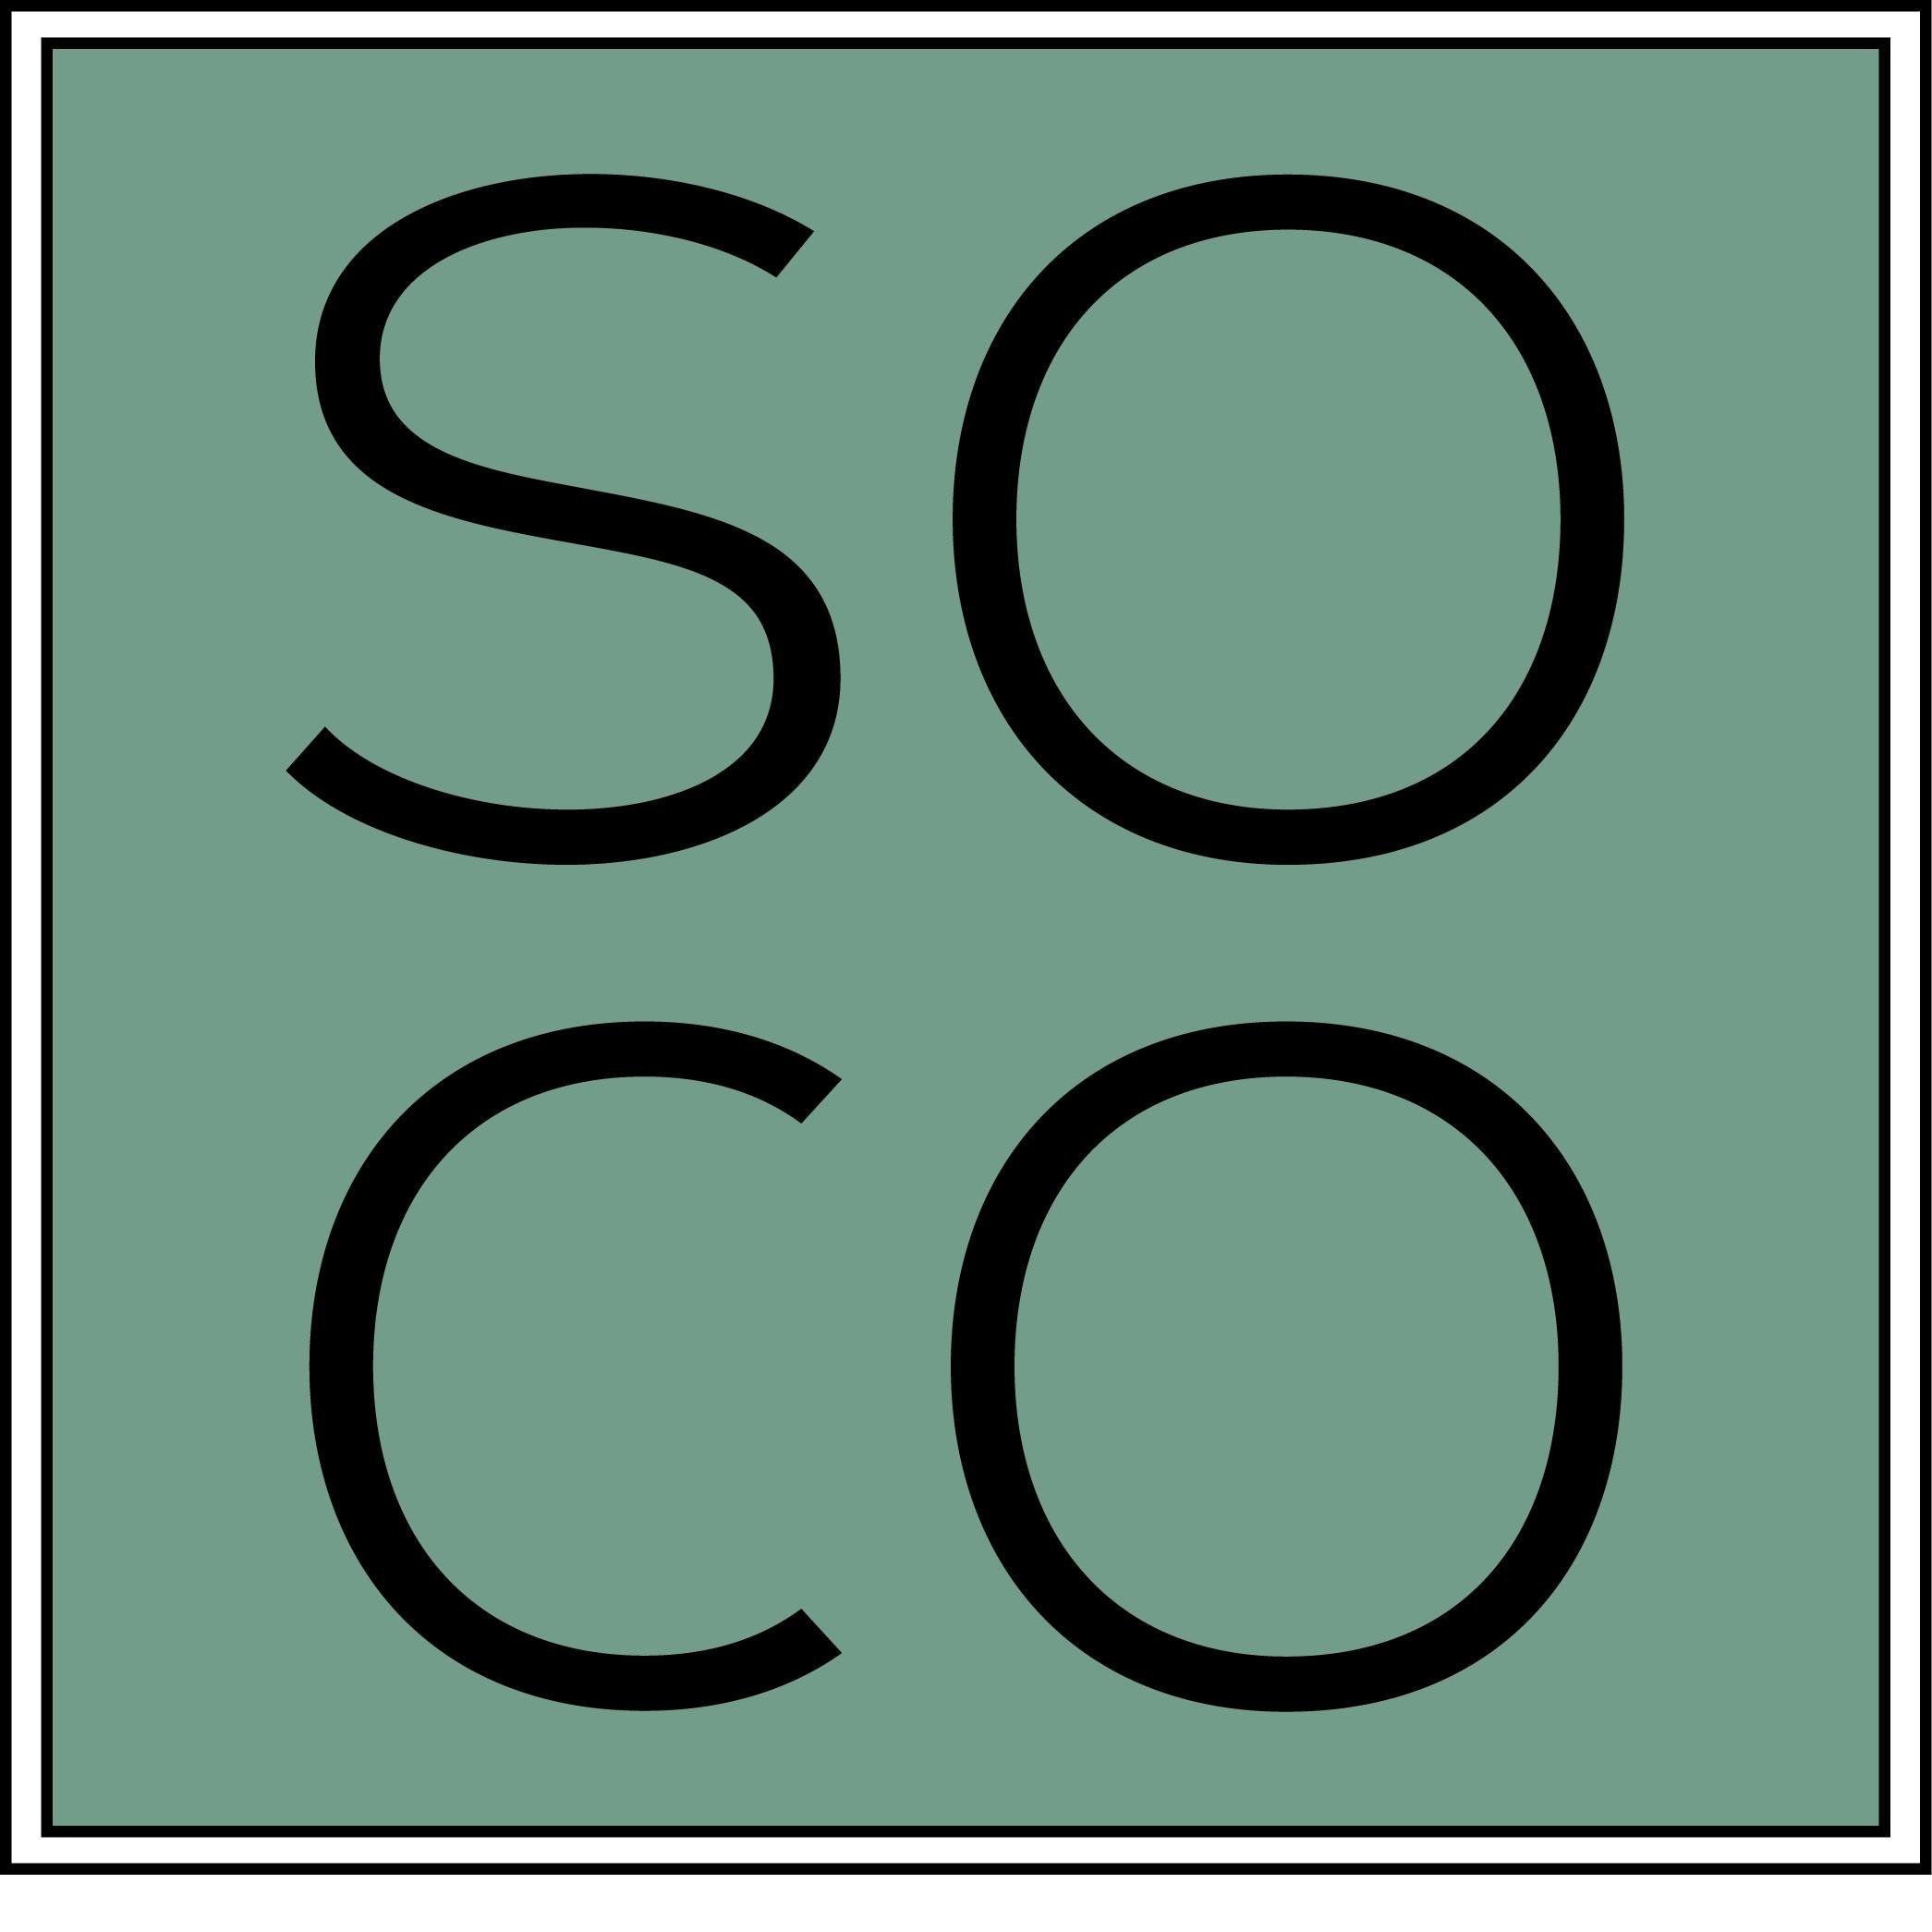 Simple Foods and Great Vibe.             Toronto's new restaurant SOCO Kitchen + Bar with Exec Chef Keith Pears